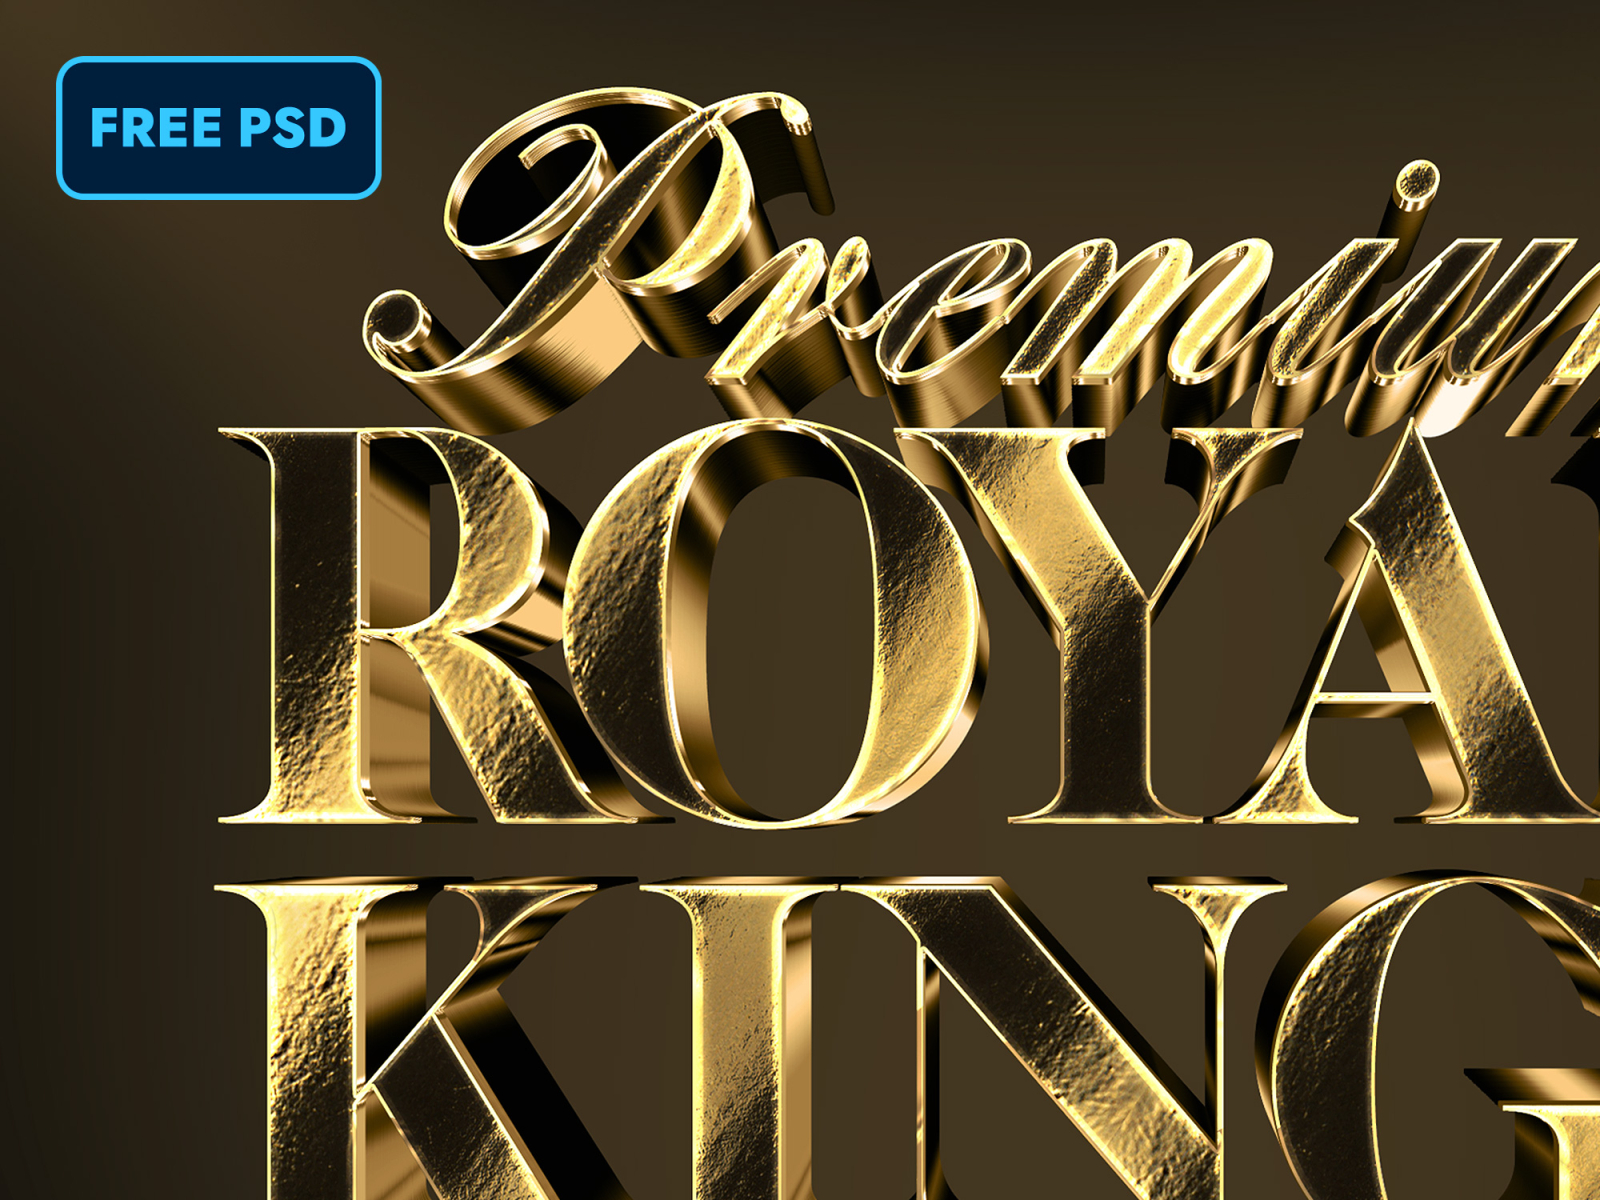 Download FREE PSD 3D Gold Text and Logo Effect Vol.2 by Hyperpix on Dribbble